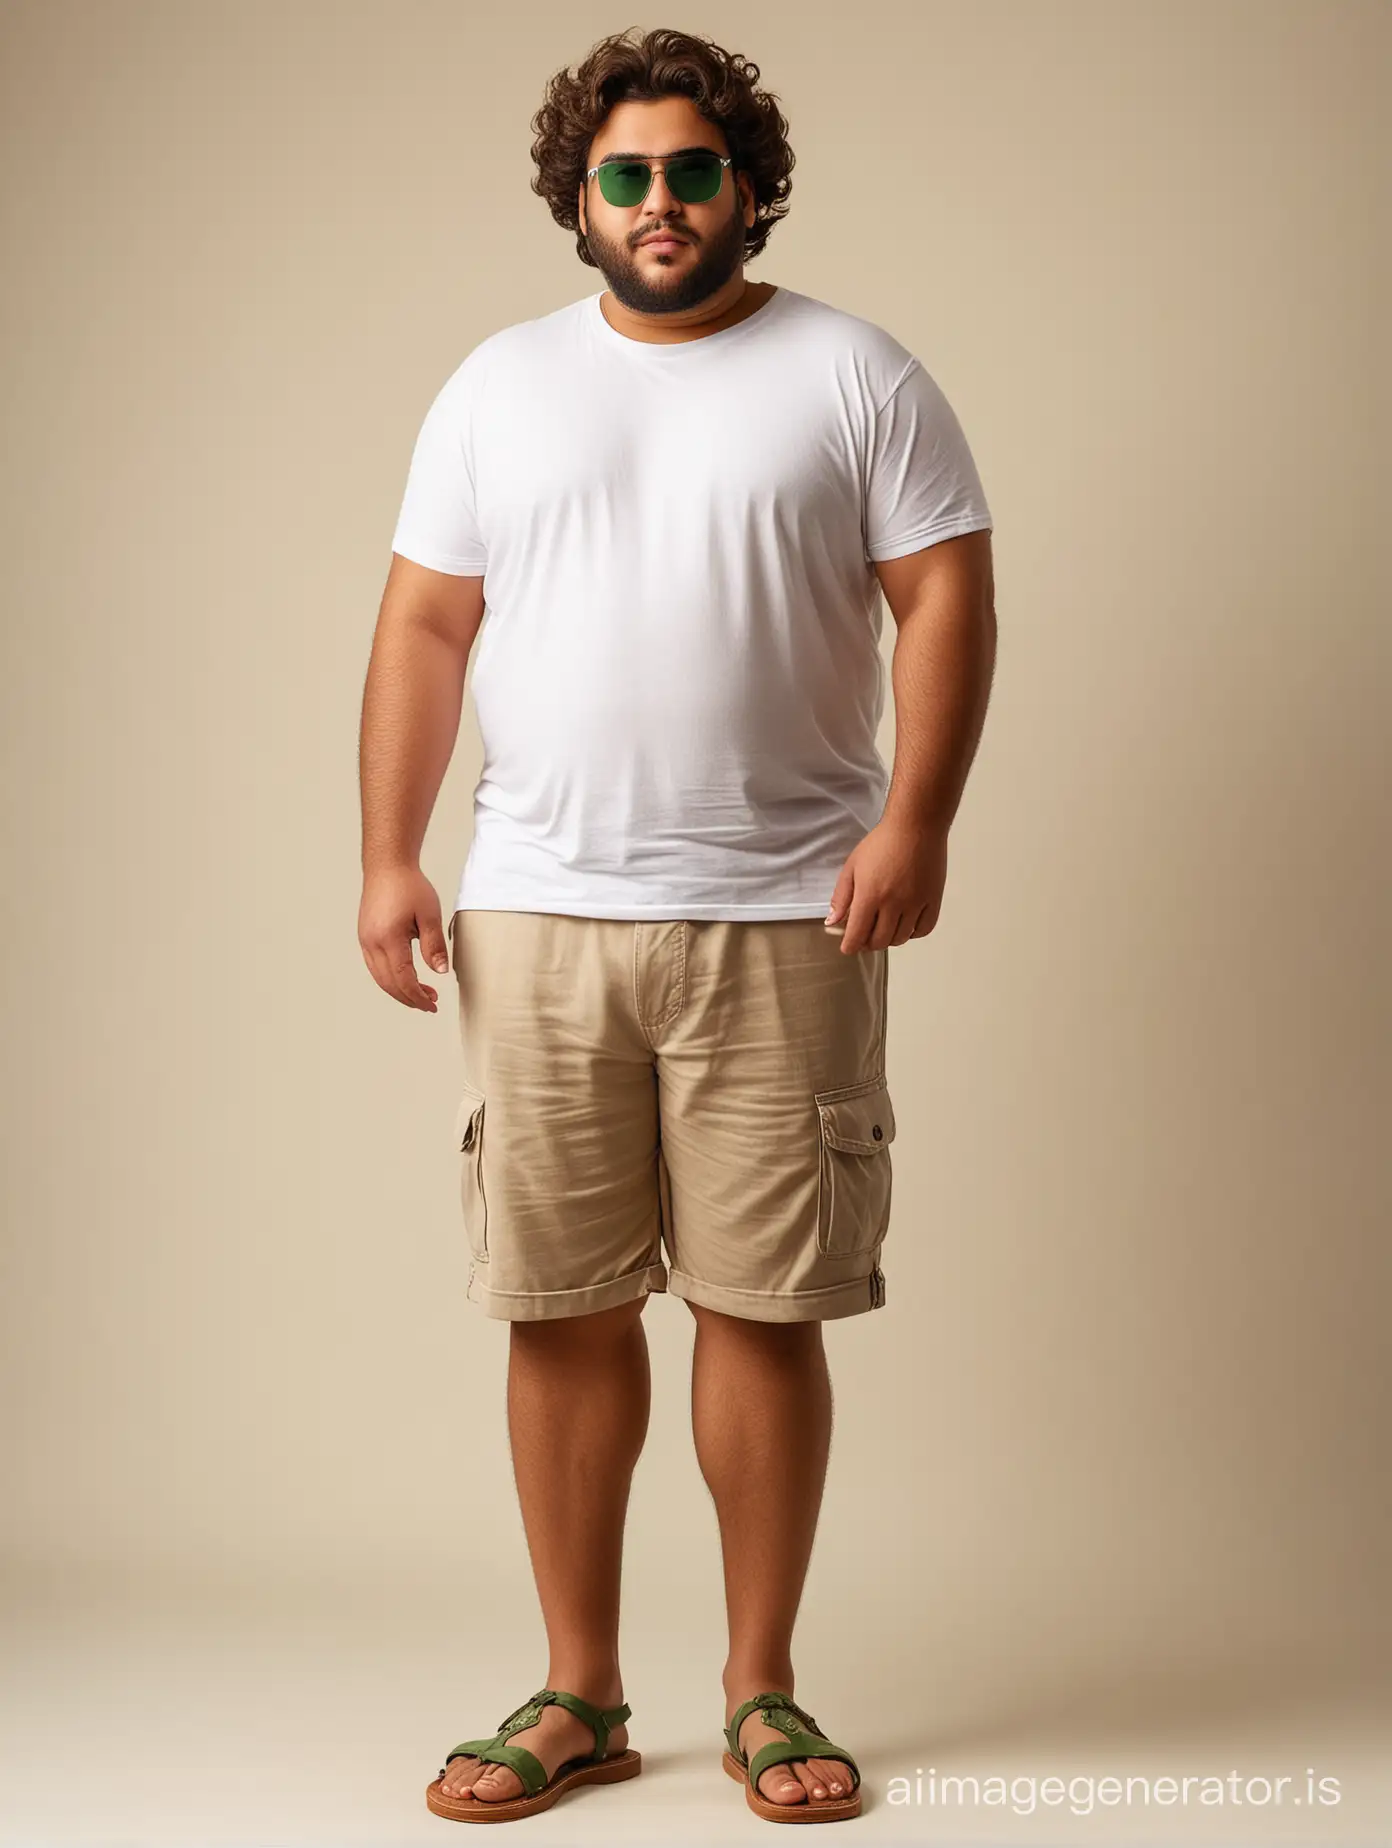 iranian fat man 20 years old, wearing white T-shirt ,brown short pnats, green sandals, white sunglasses, long brown curly hair,  full body shot, fantasy  light cream solid background, dramatic lighting